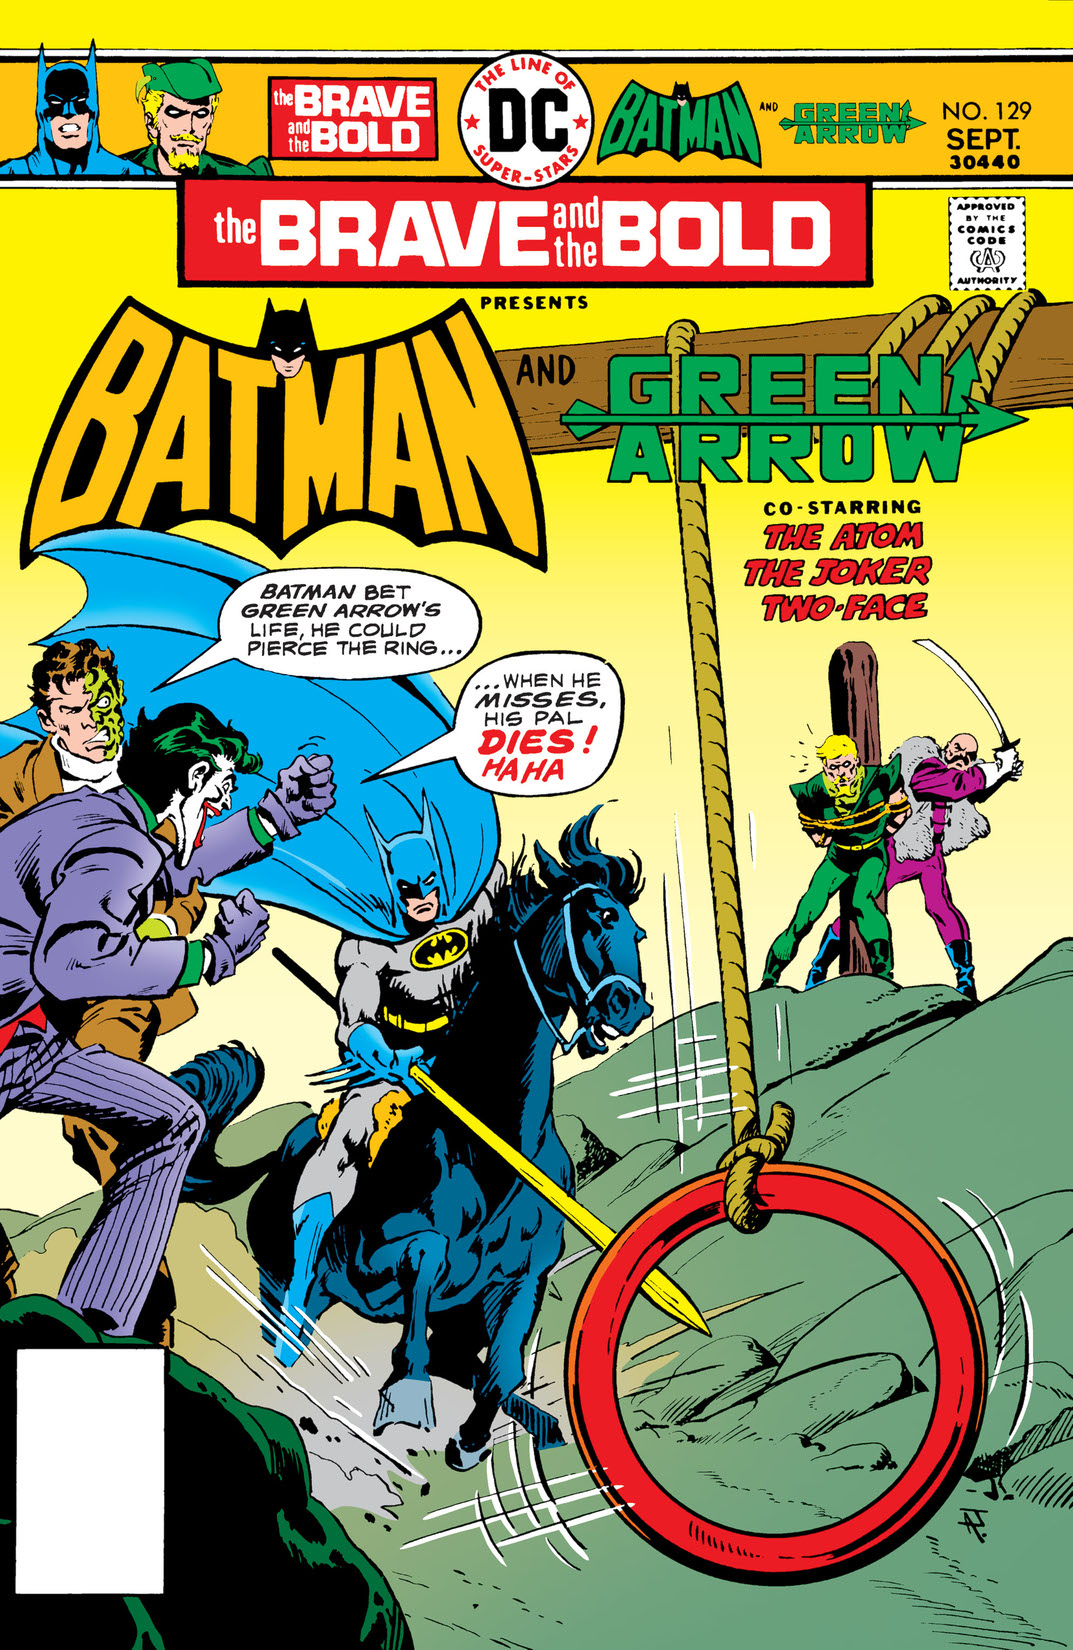 The Brave and the Bold (1955-) #129 preview images